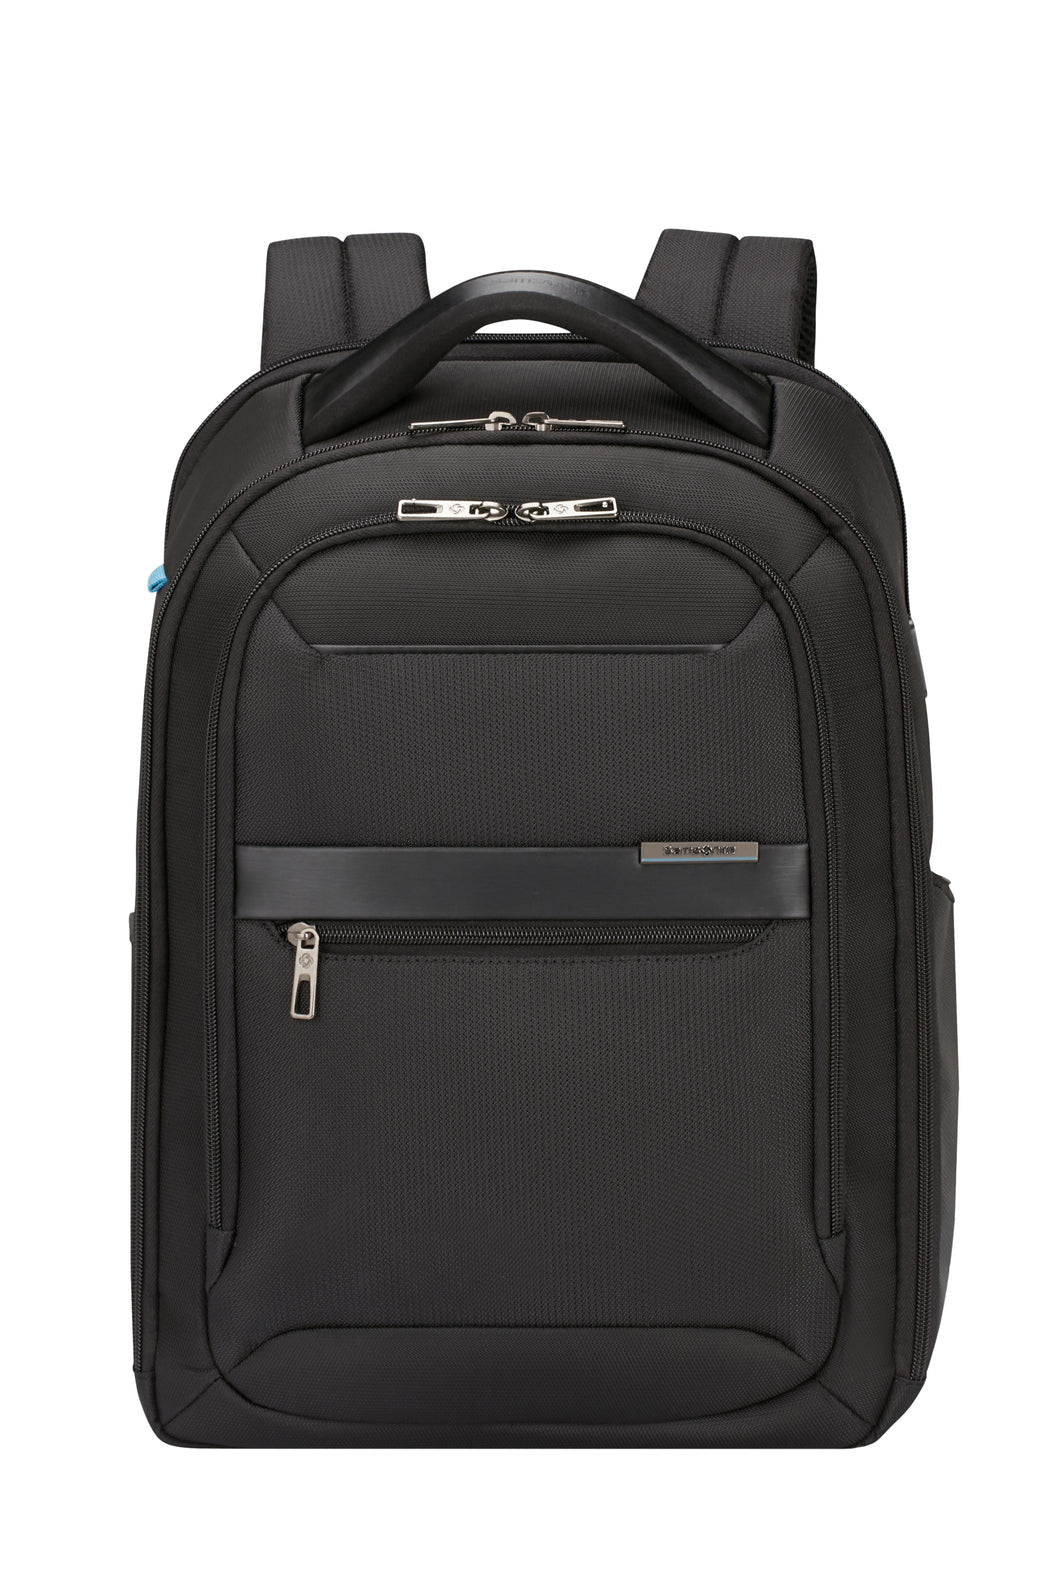 VECTURA EVO Laptop Backpack 15.6